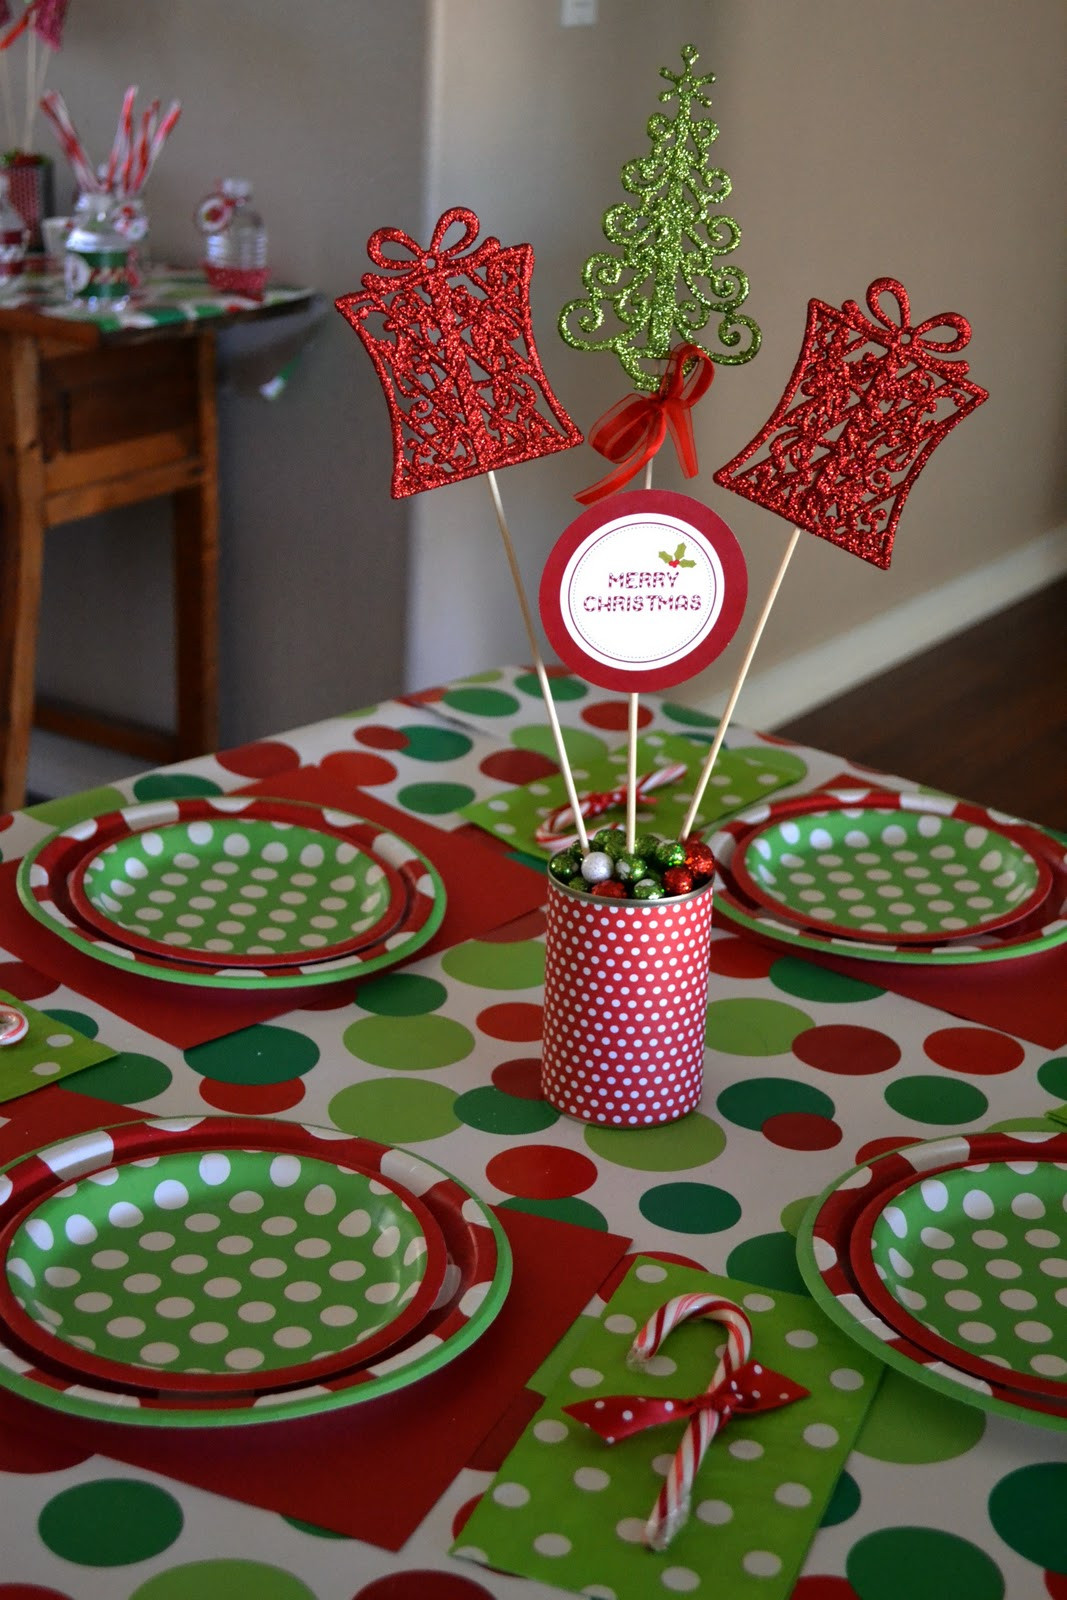 Toddler Christmas Party Ideas
 Crissy s Crafts Holly Jolly Holiday Party